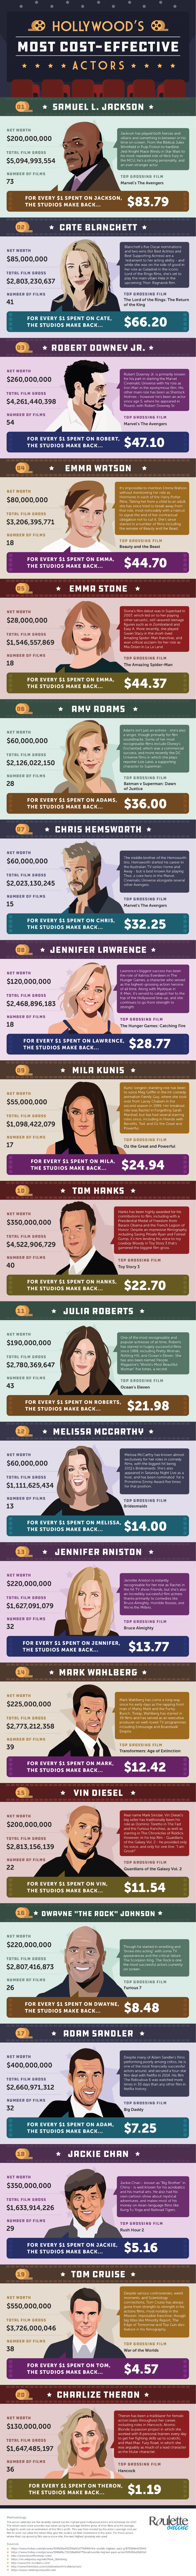 Hollywood’s Most Cost-Effective Actors